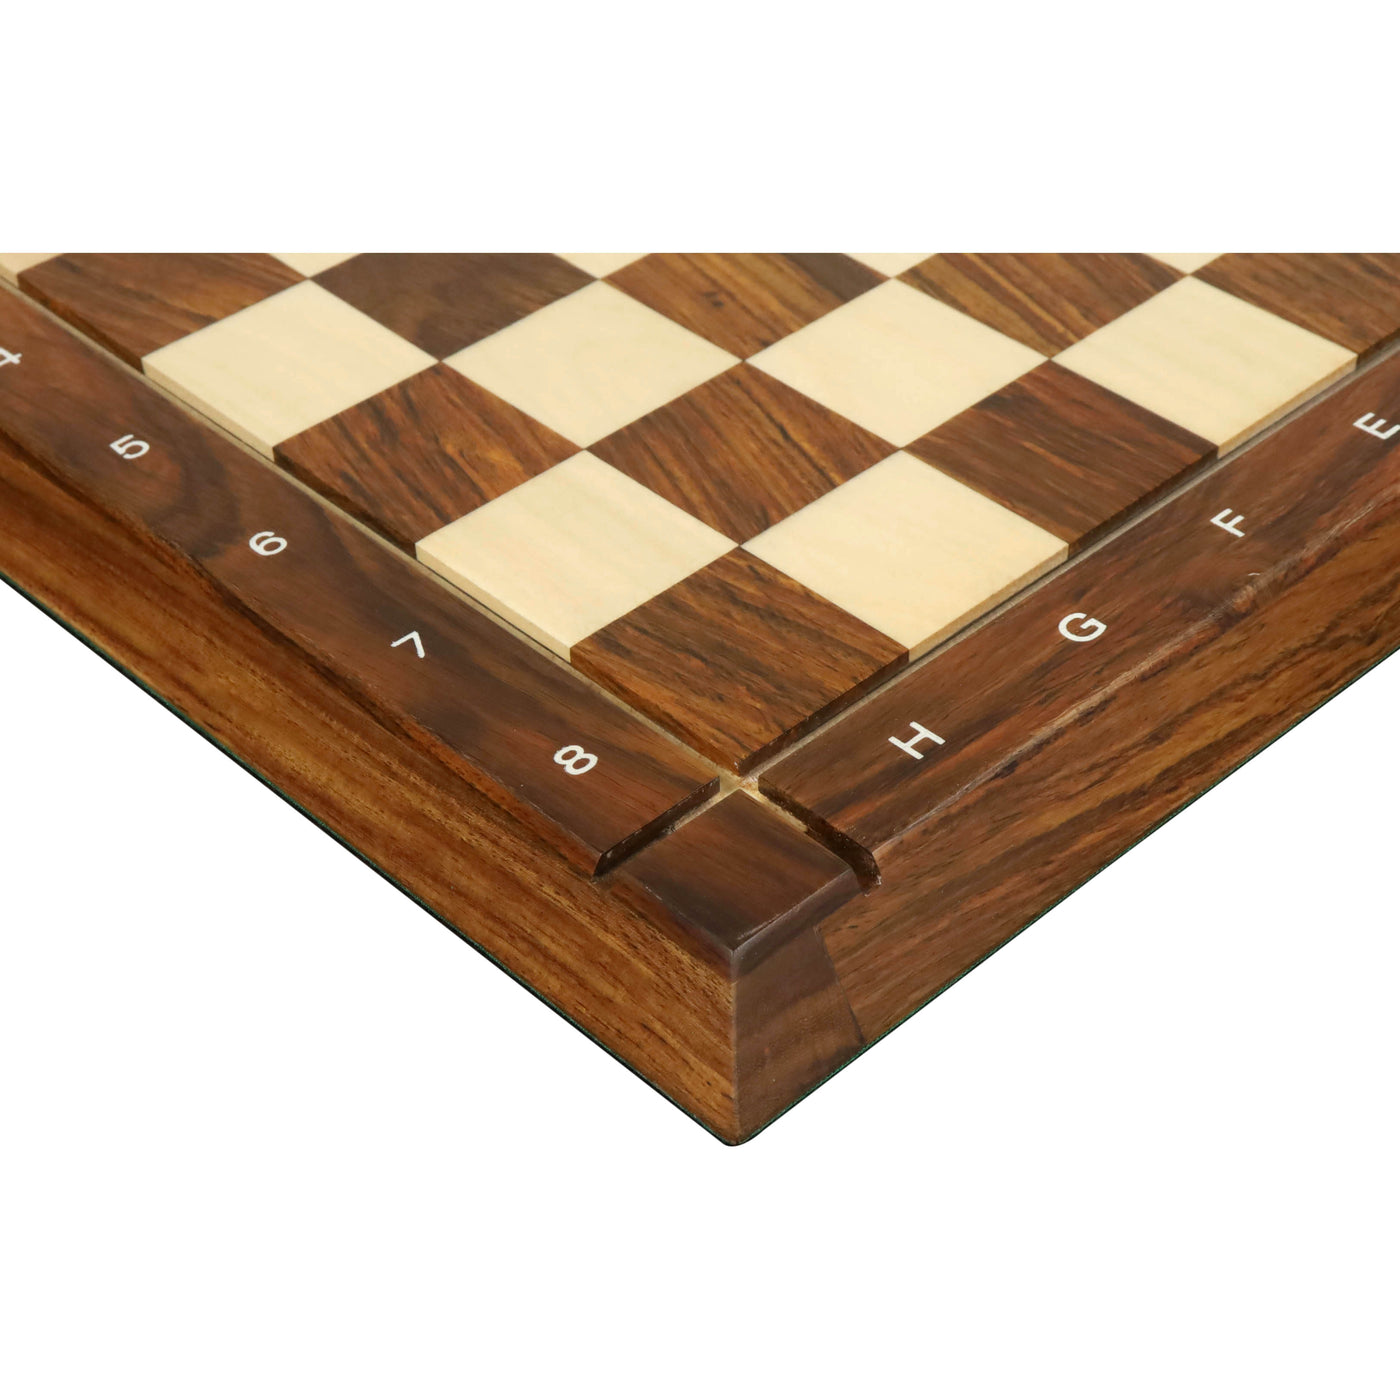 Standard Walnut Maple Wooden Chess Board With Notation 18 50 Mm